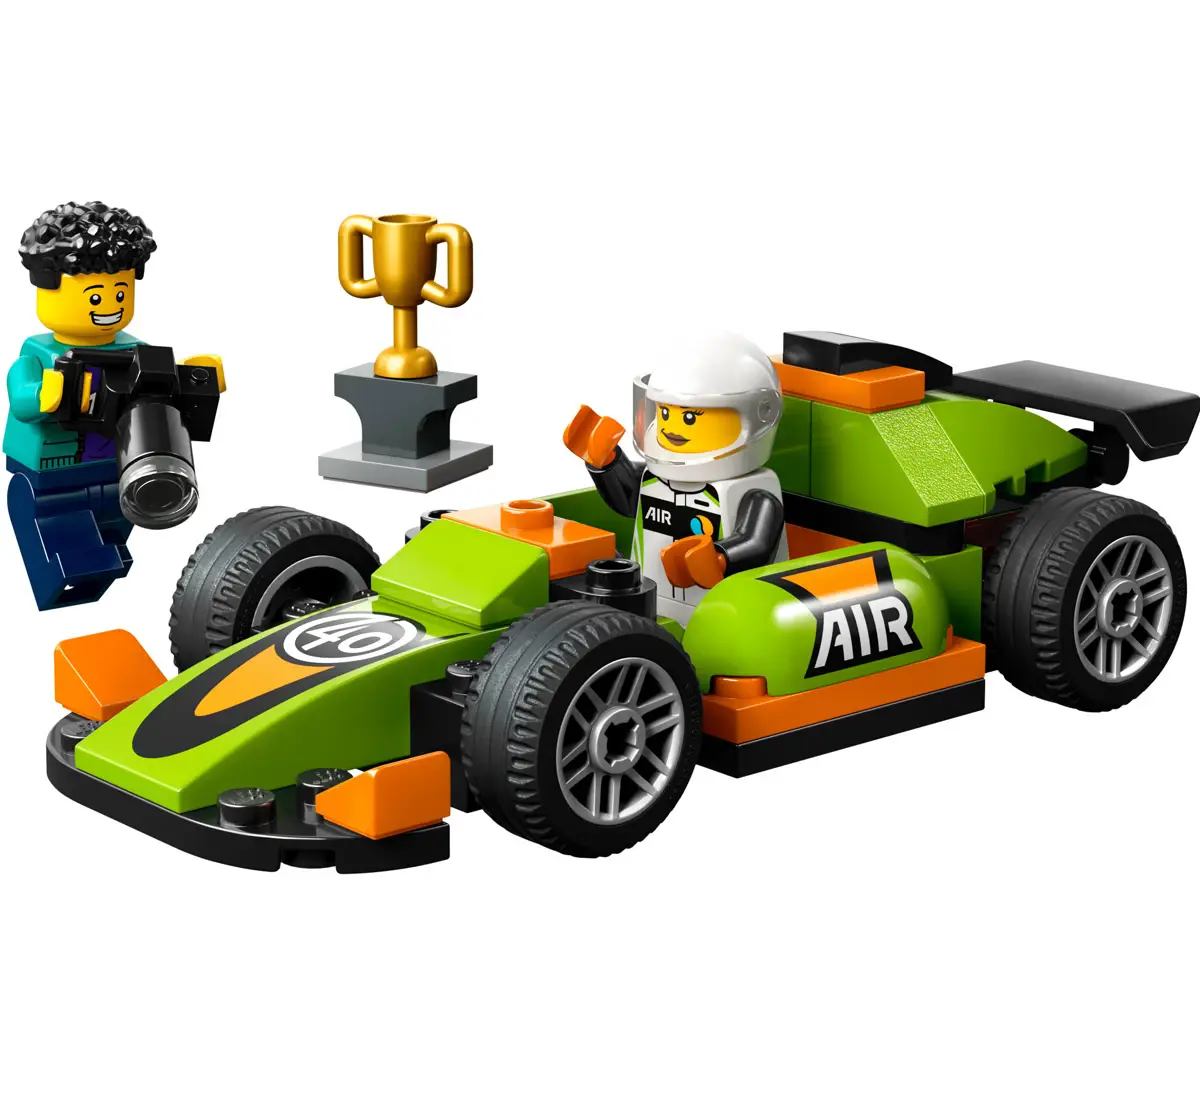 Lego City Race Car 60399 Racing Vehicle Toy Multicolour For Kids Ages 4Y+ ( 56 Pieces) 